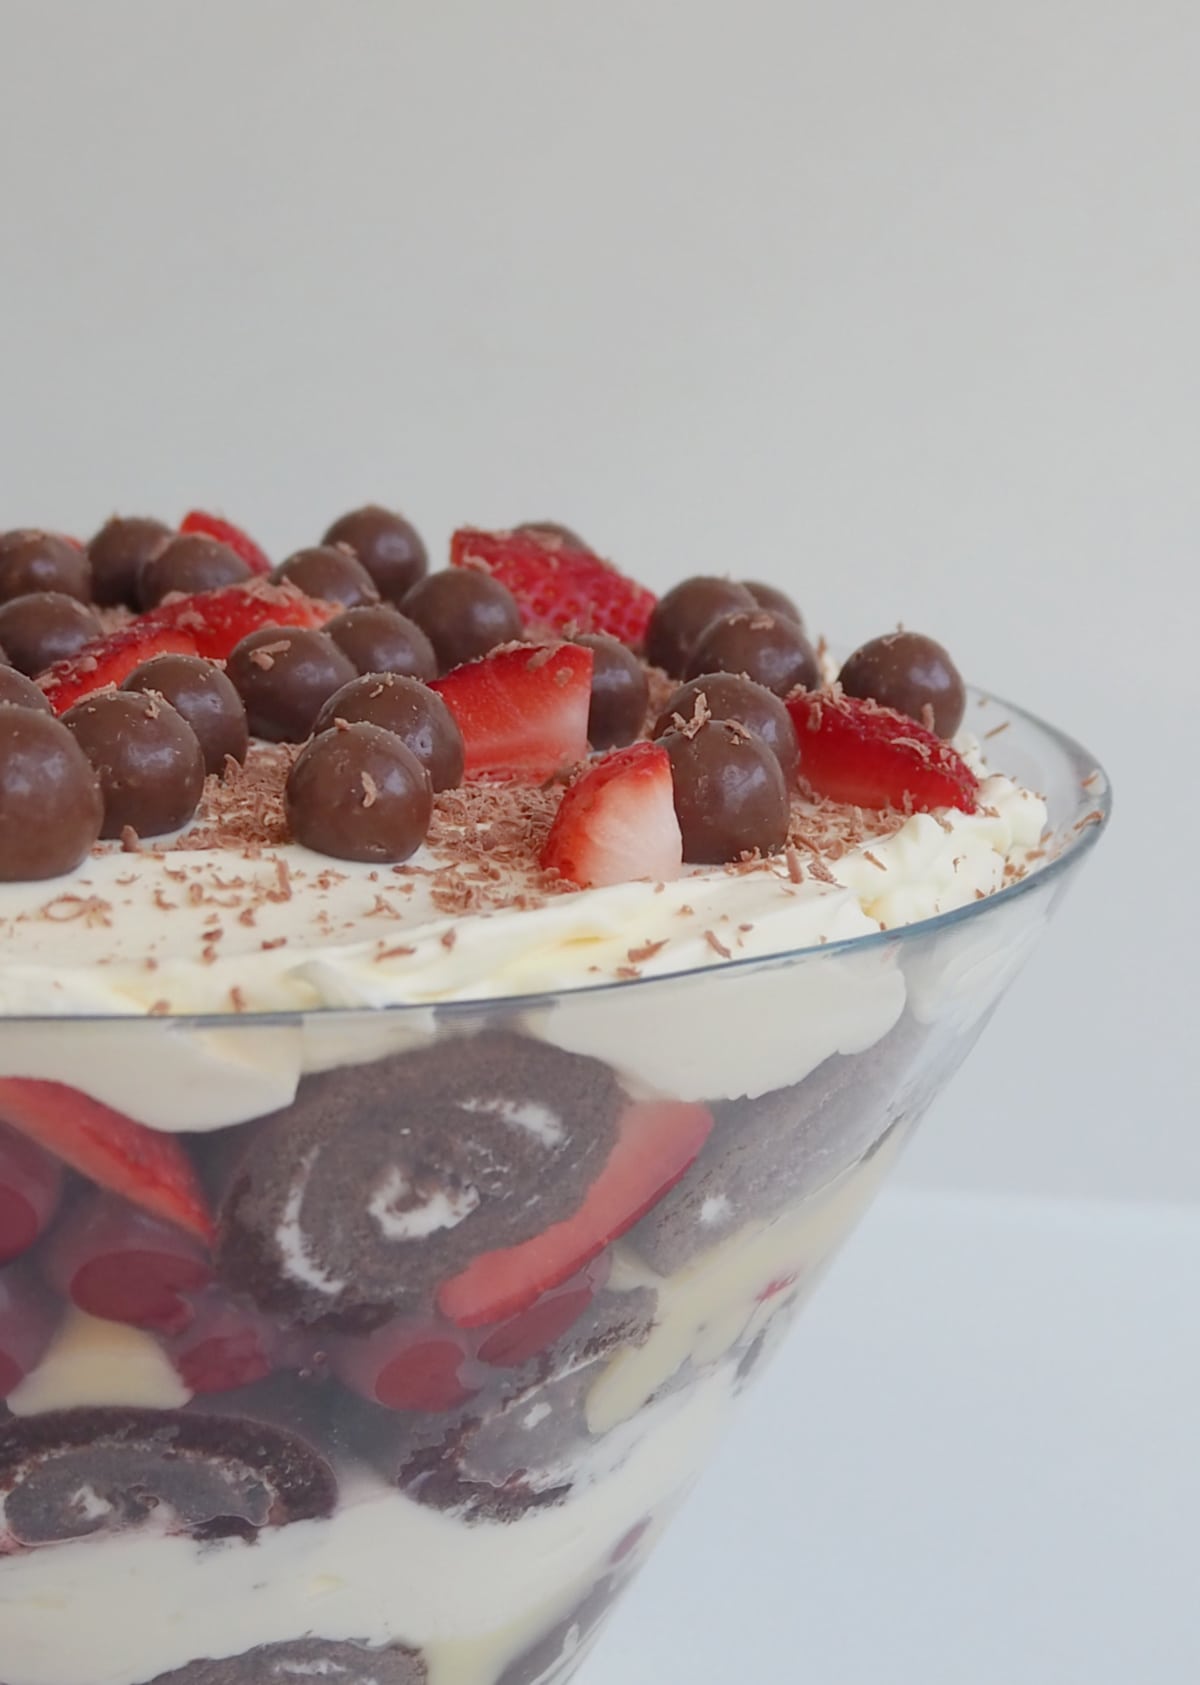 chocolate trifle in a glass bowl.